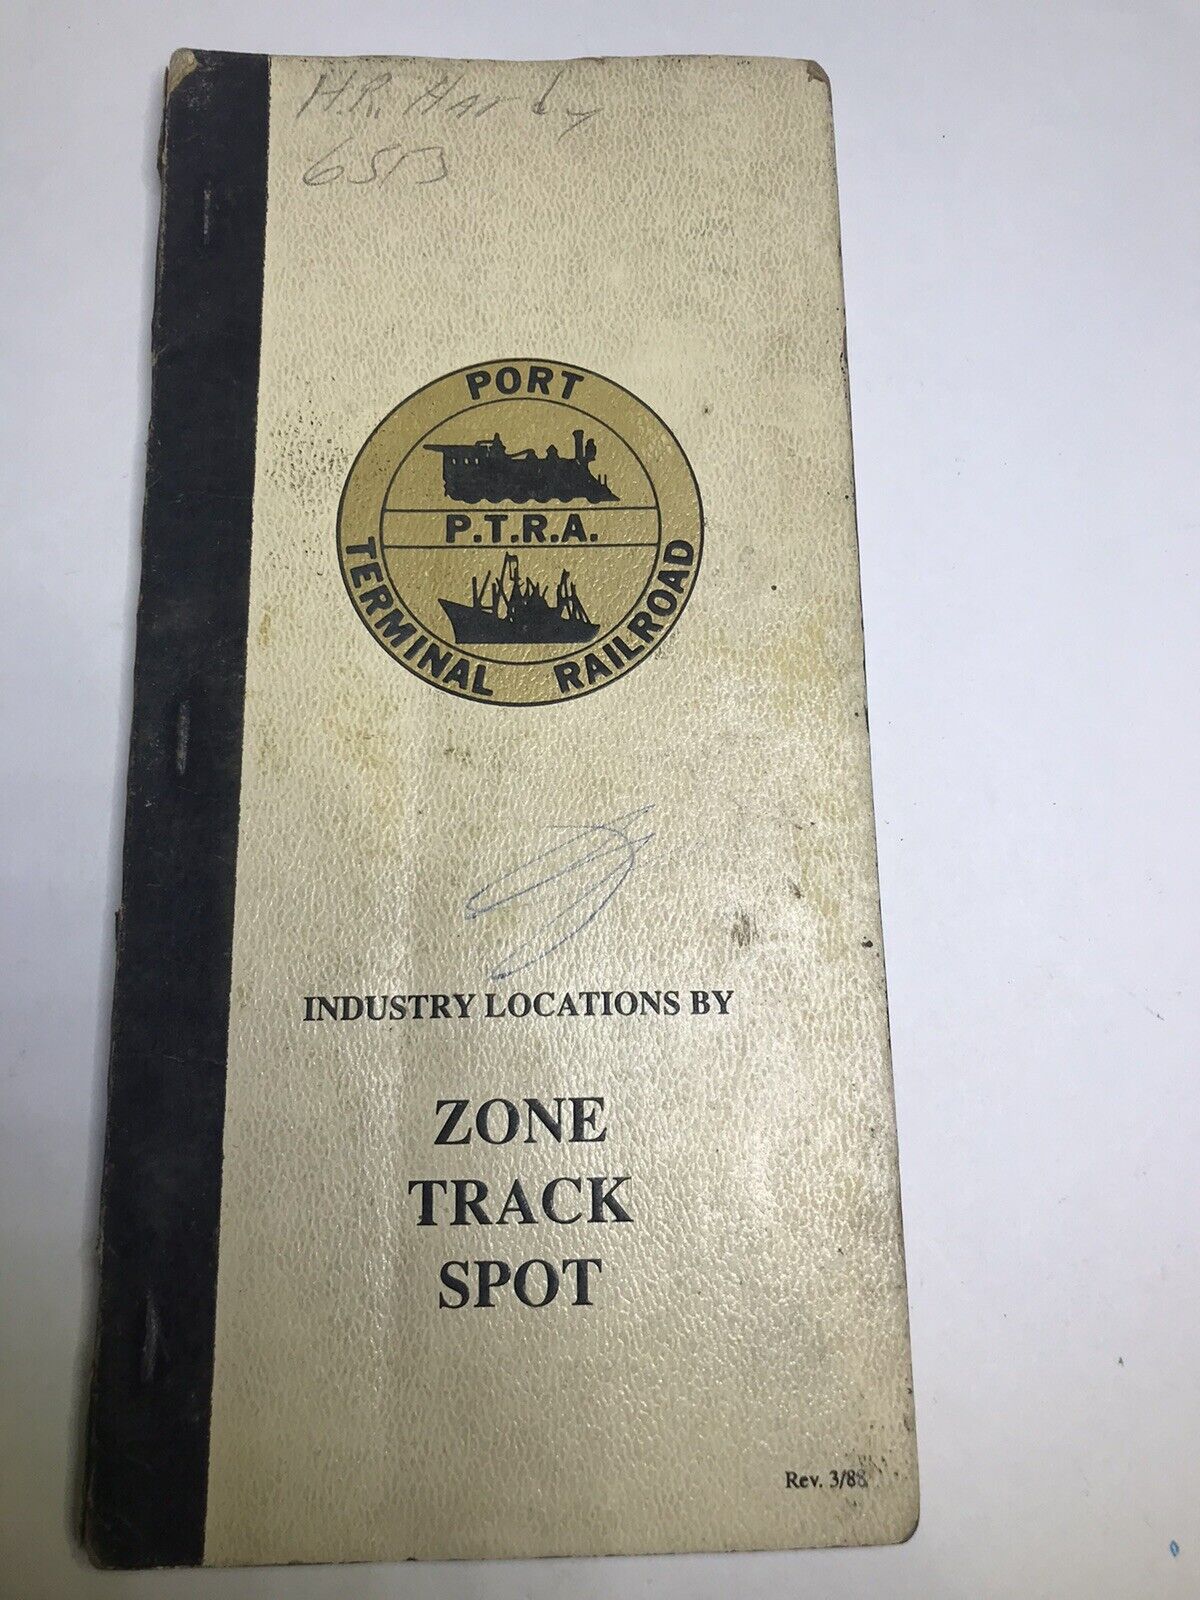 1988 Port Terminal Railroad Industry Locations by Zone Track Spot Book